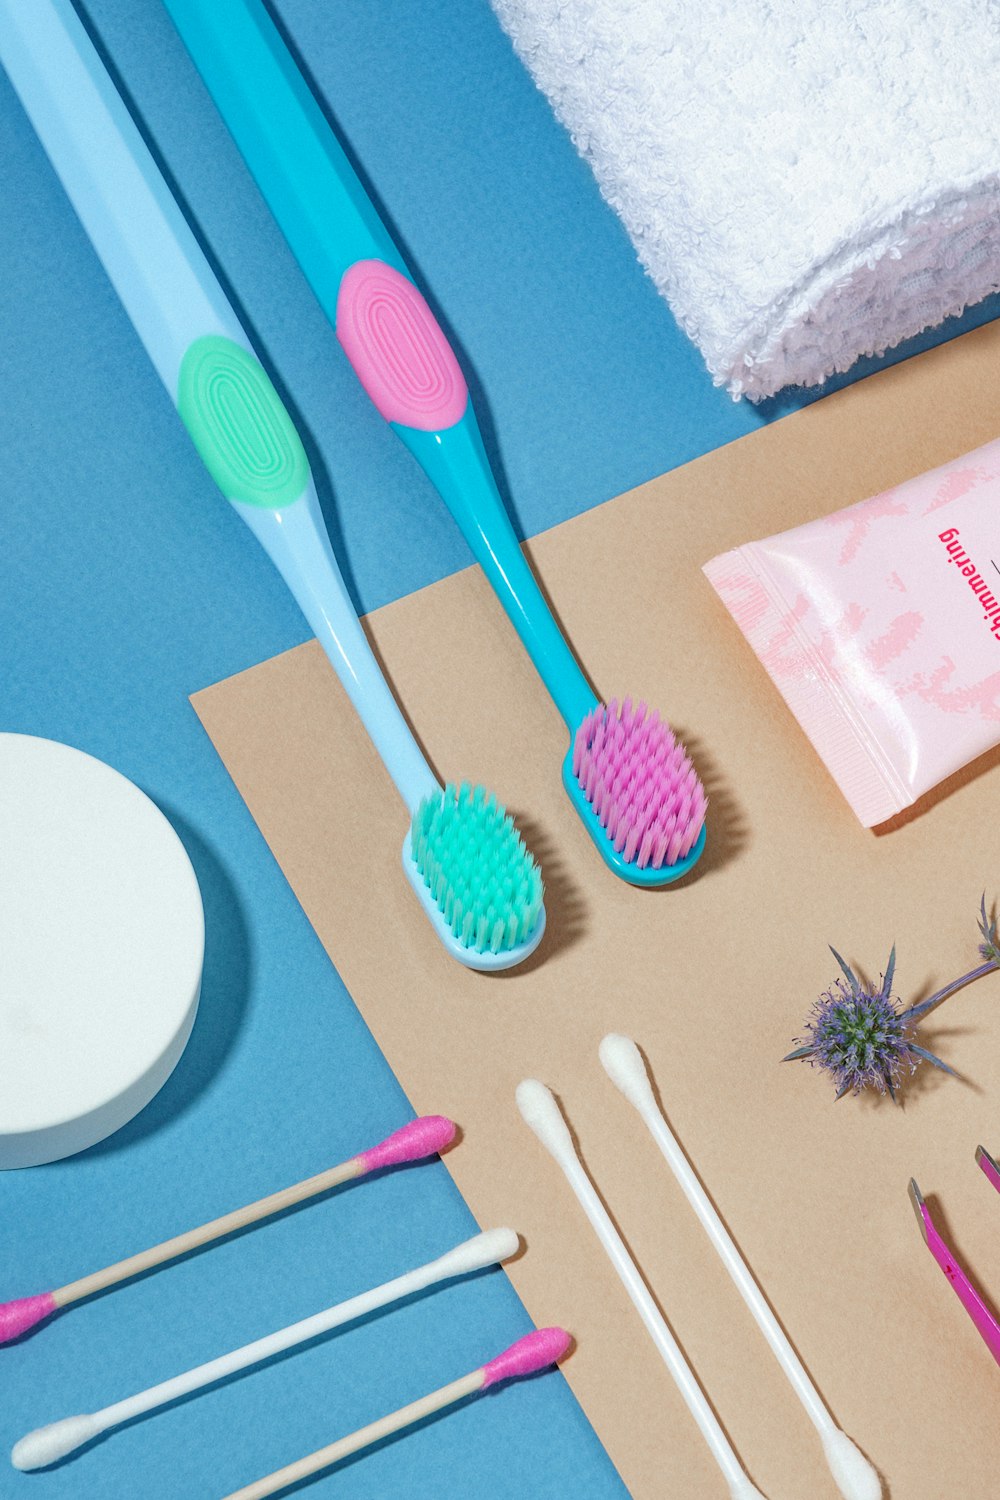 toothbrushes, toothpaste, soap, and other items laid out on